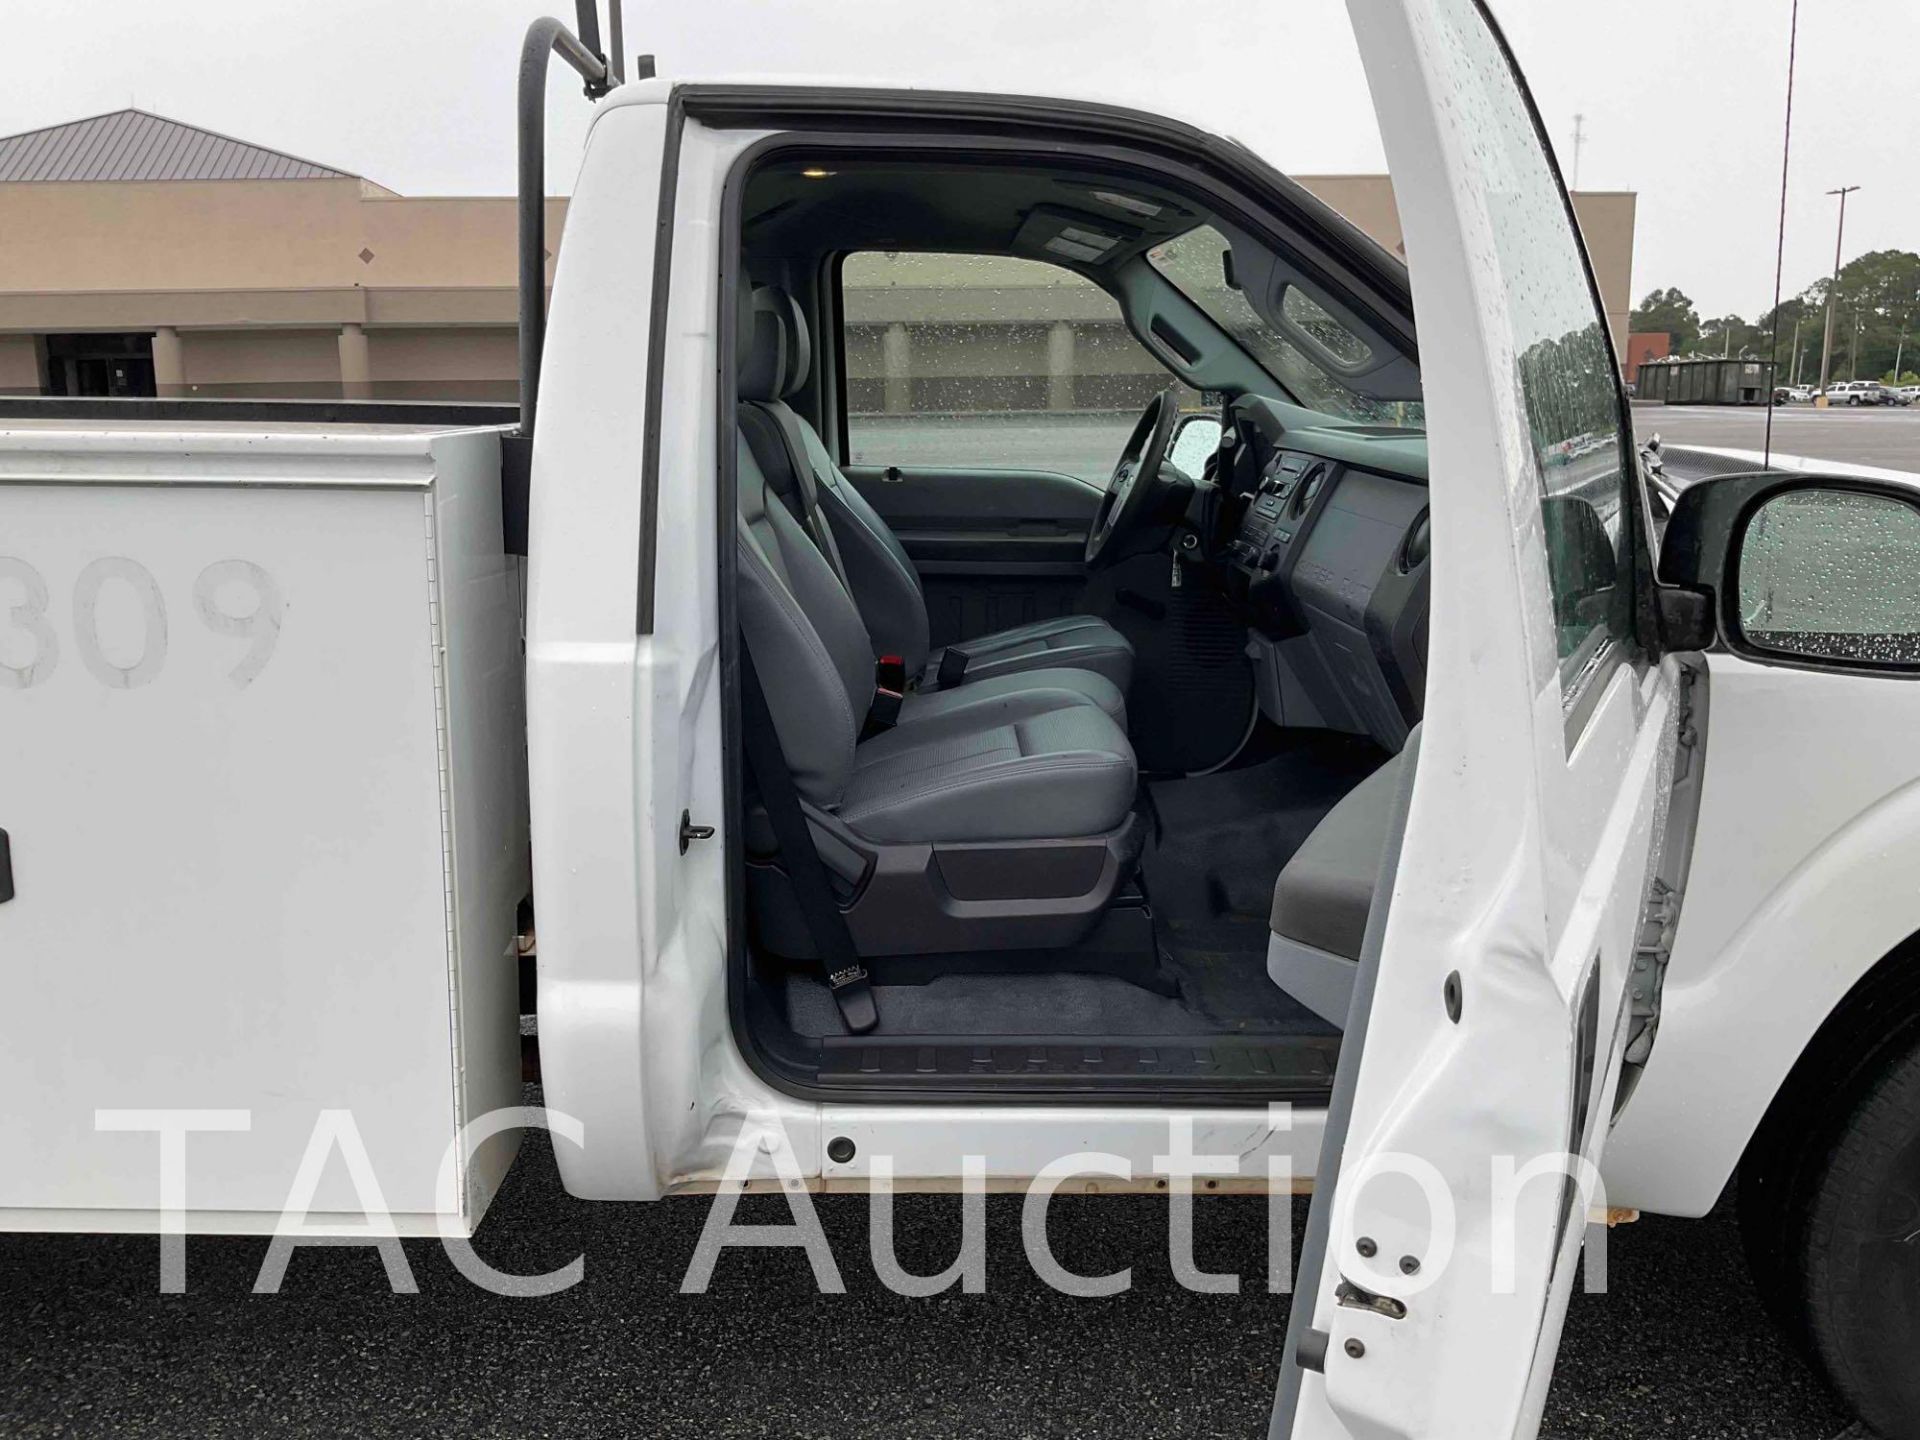 2015 Ford F250 Super Duty Service Truck - Image 17 of 50